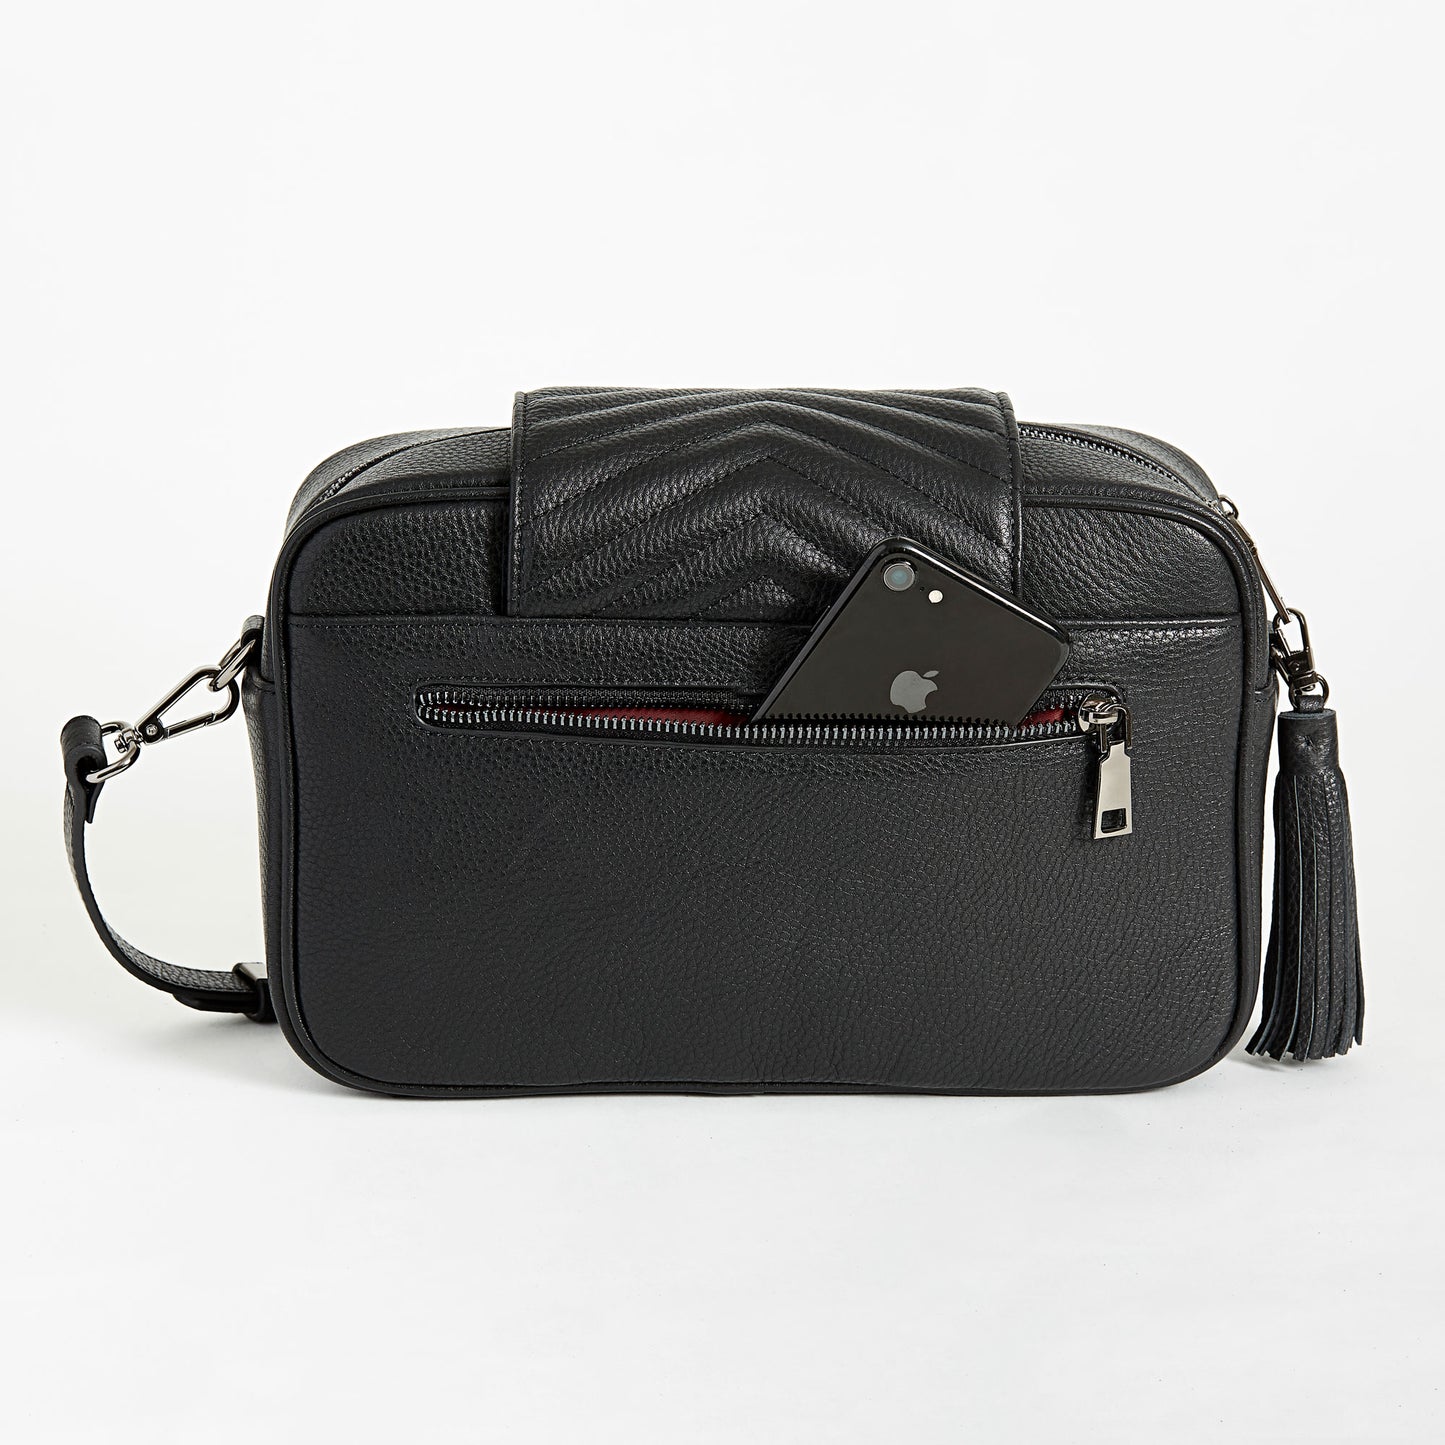 Black leather compact crossbody baby bag